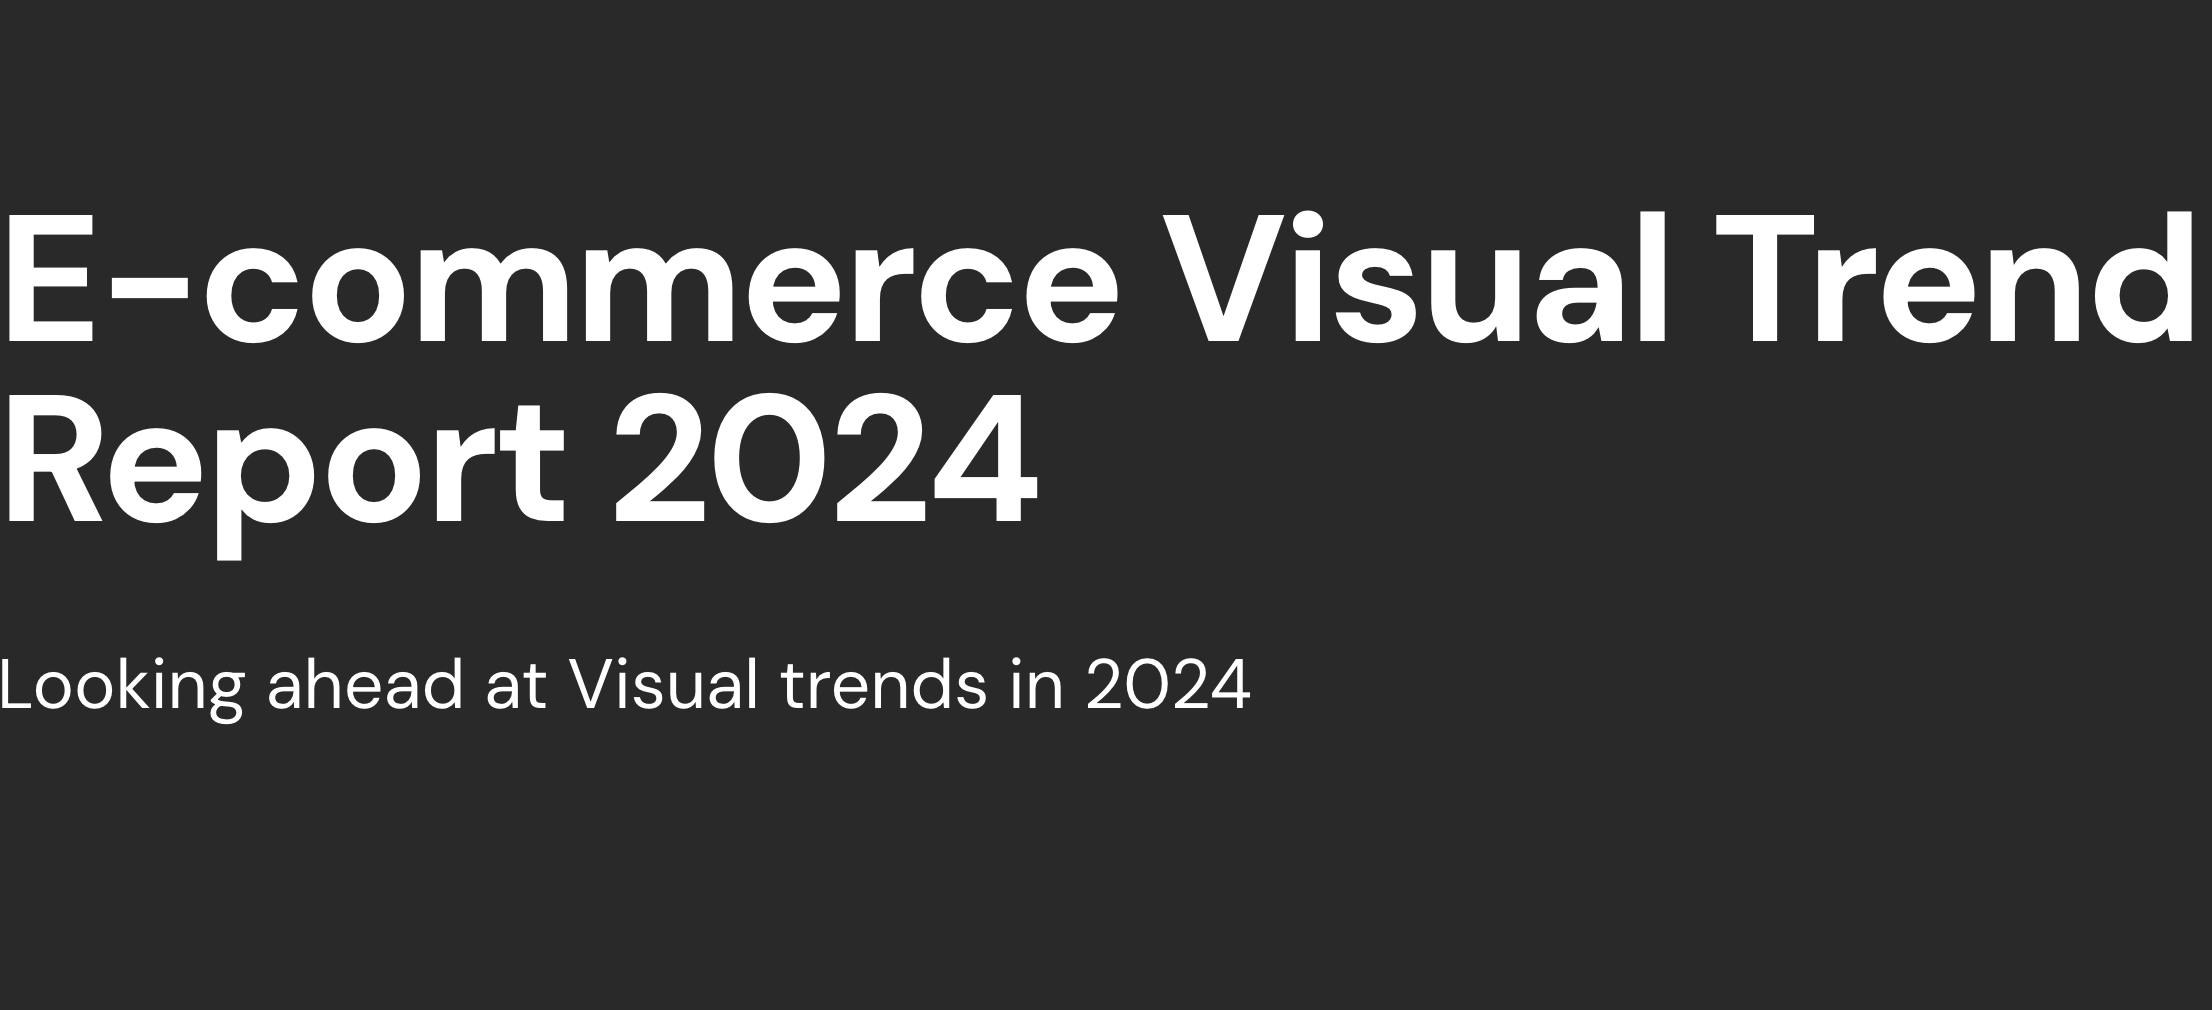 E-commerce Visual Trends report text image 